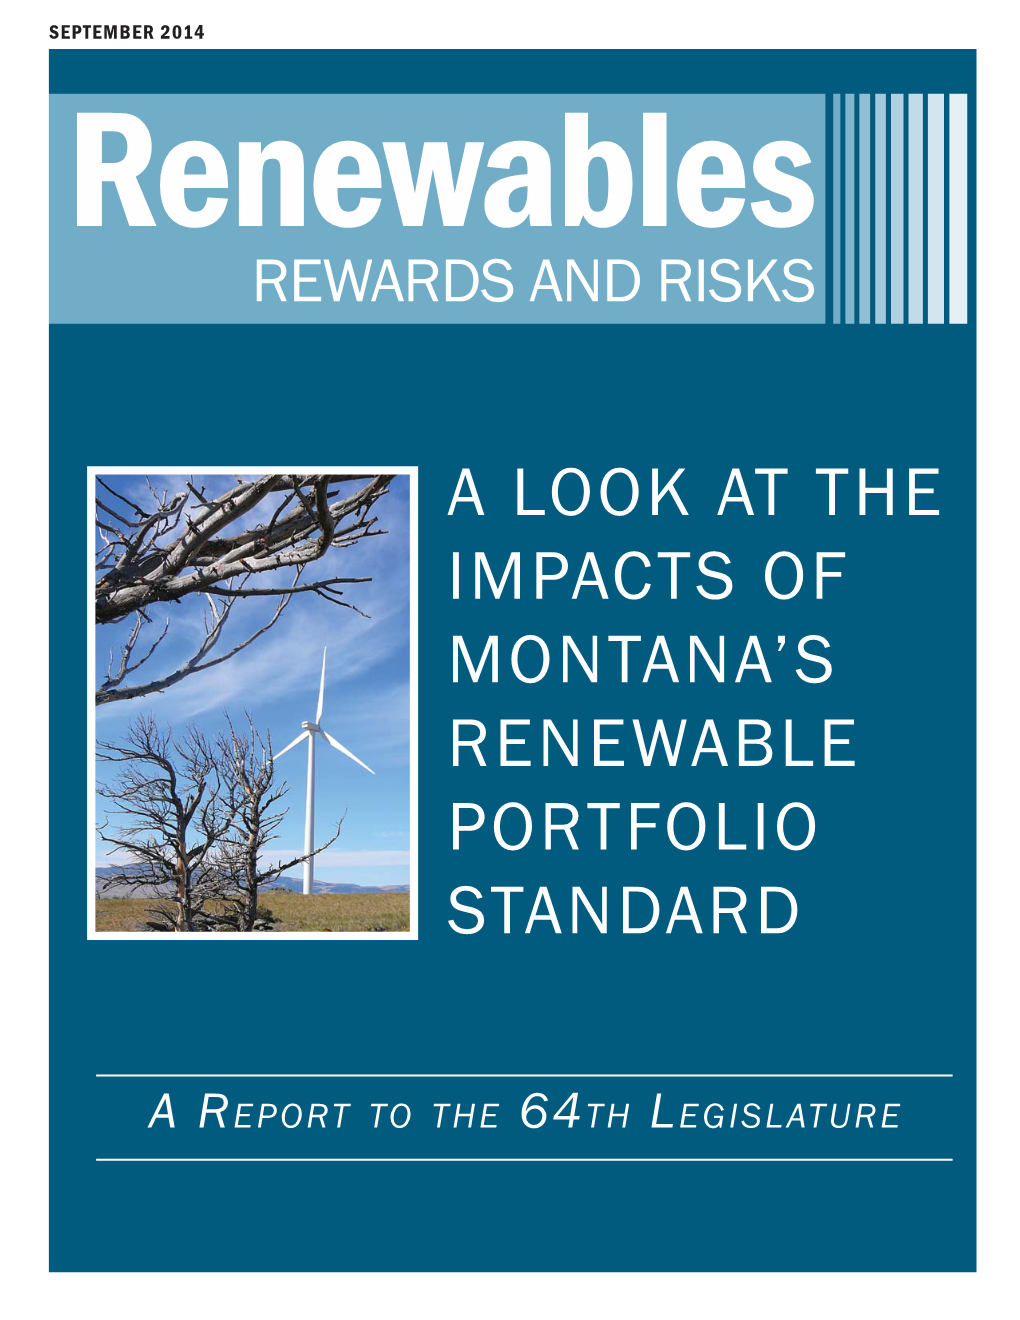 A Look at the Impacts of Montana's Renewable